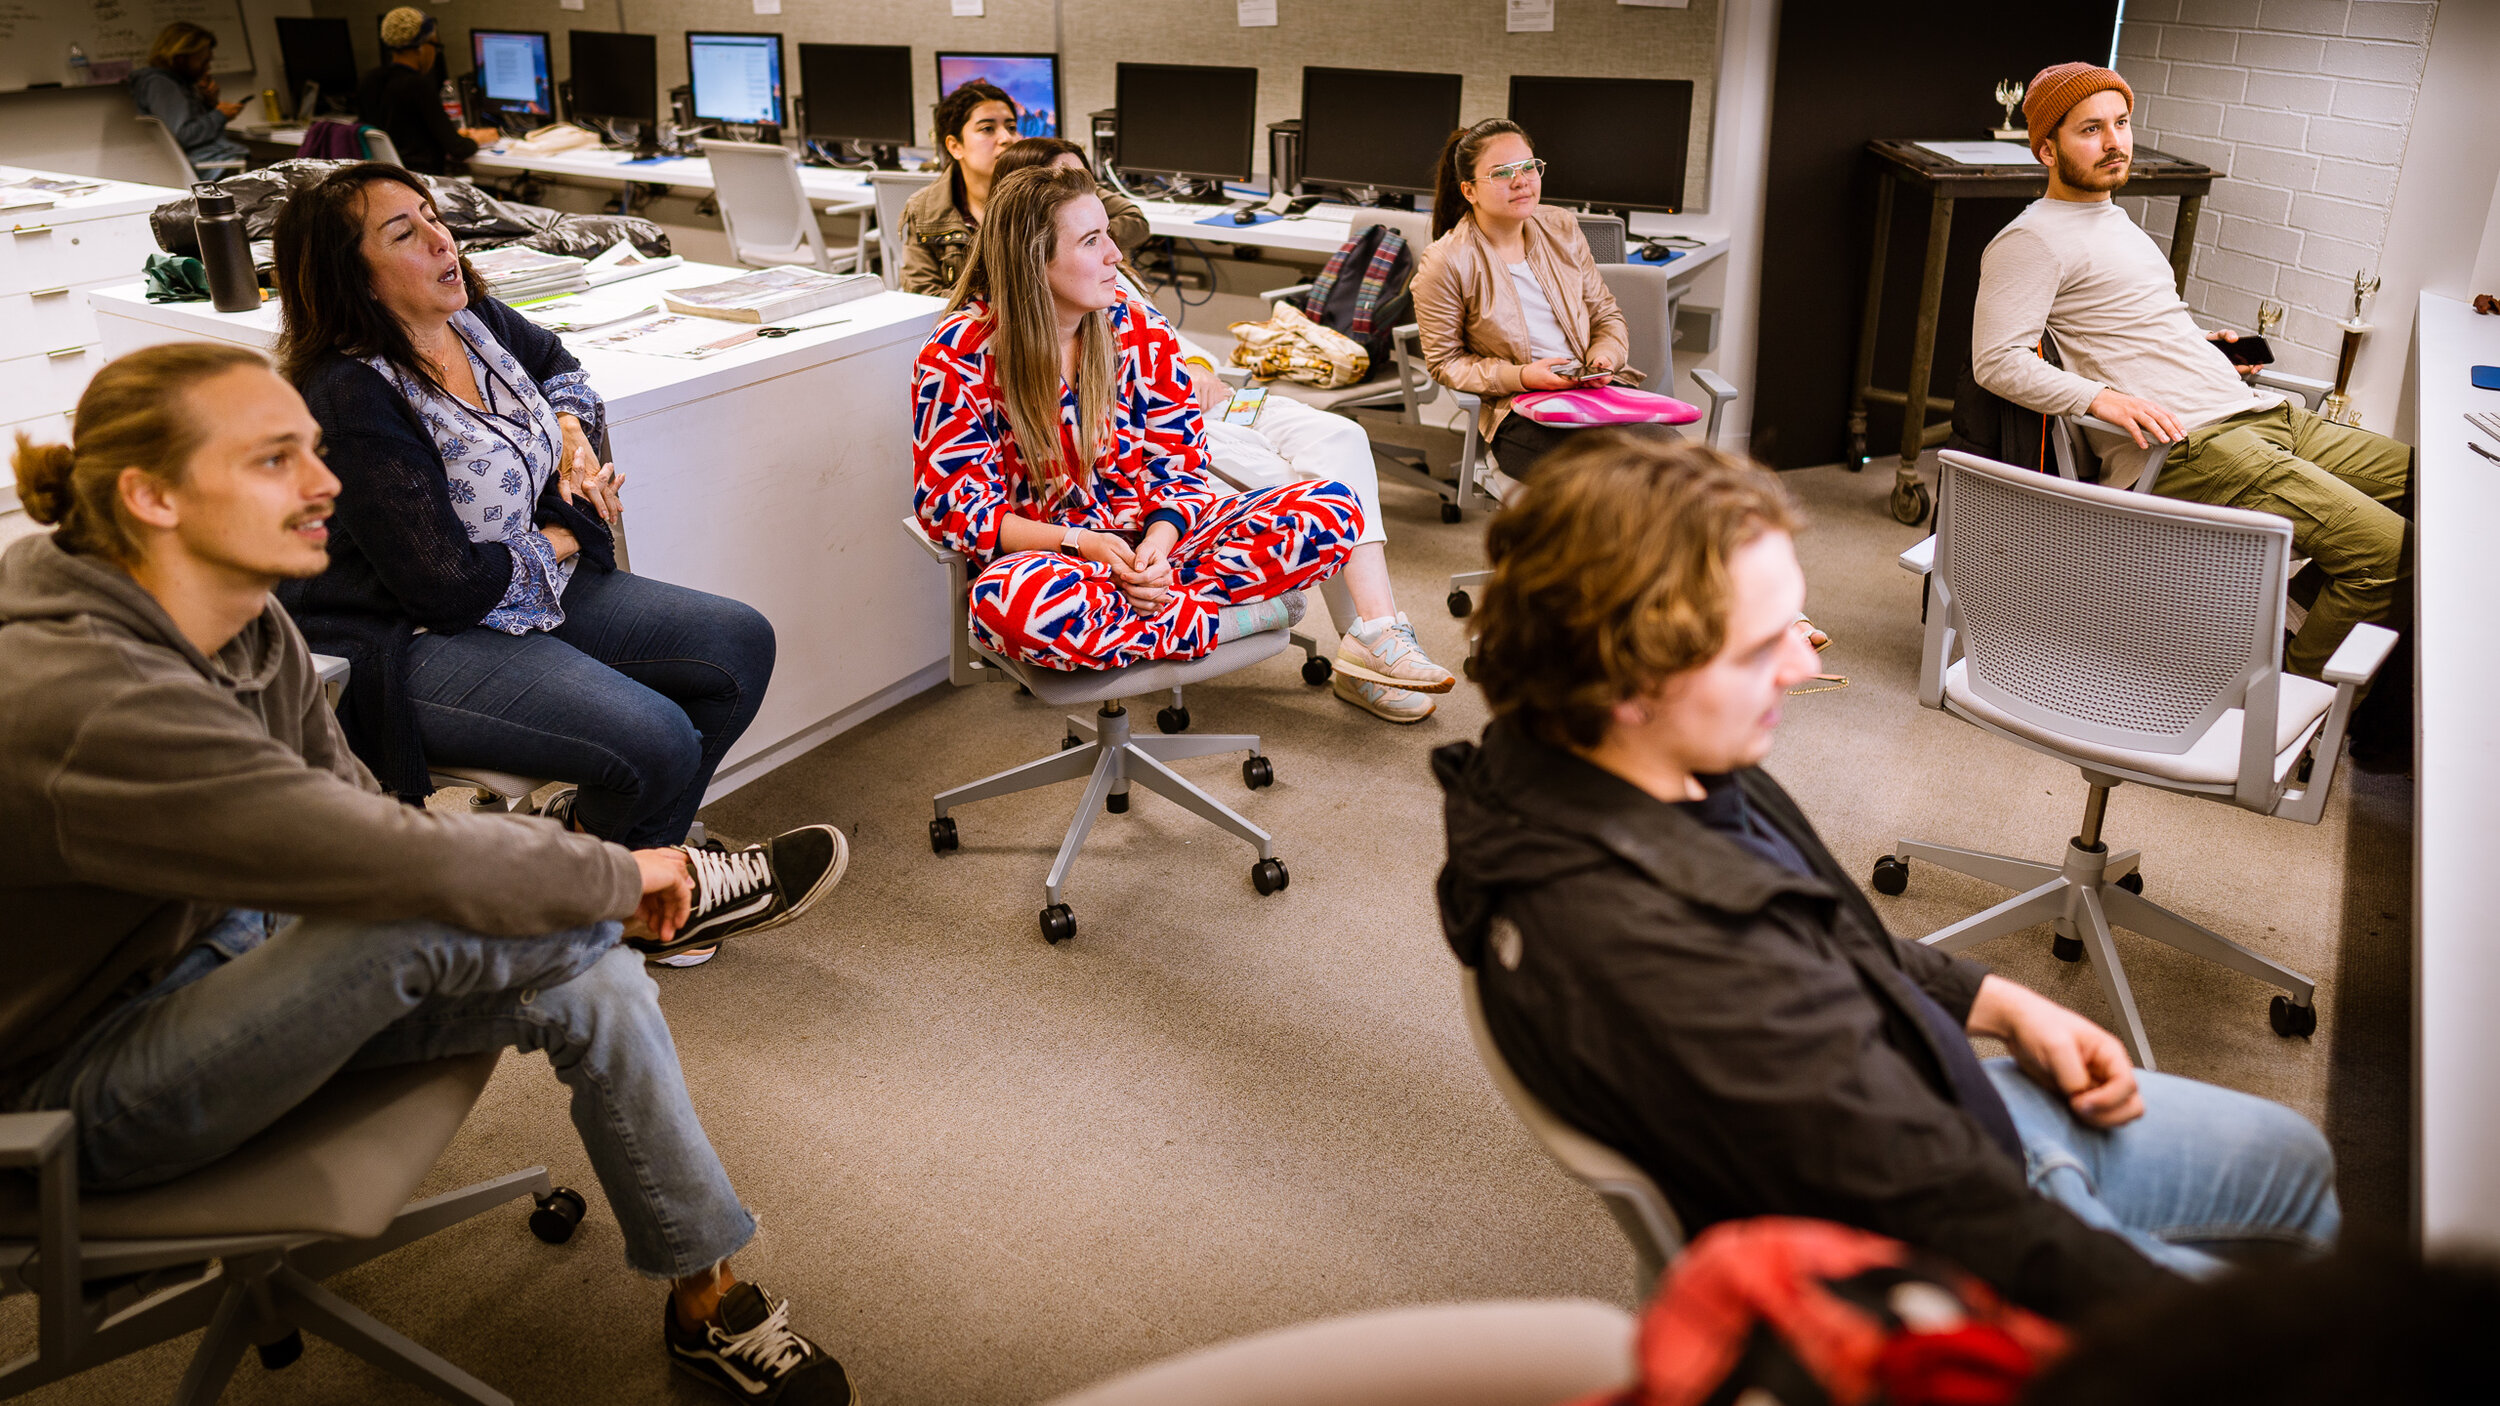  Staff members show up on Tuesday, Mar. 10, 2020 to take part in read-throughs led by opinion editor Evan Minniti.  (Glenn Zucman | The Corsair)  